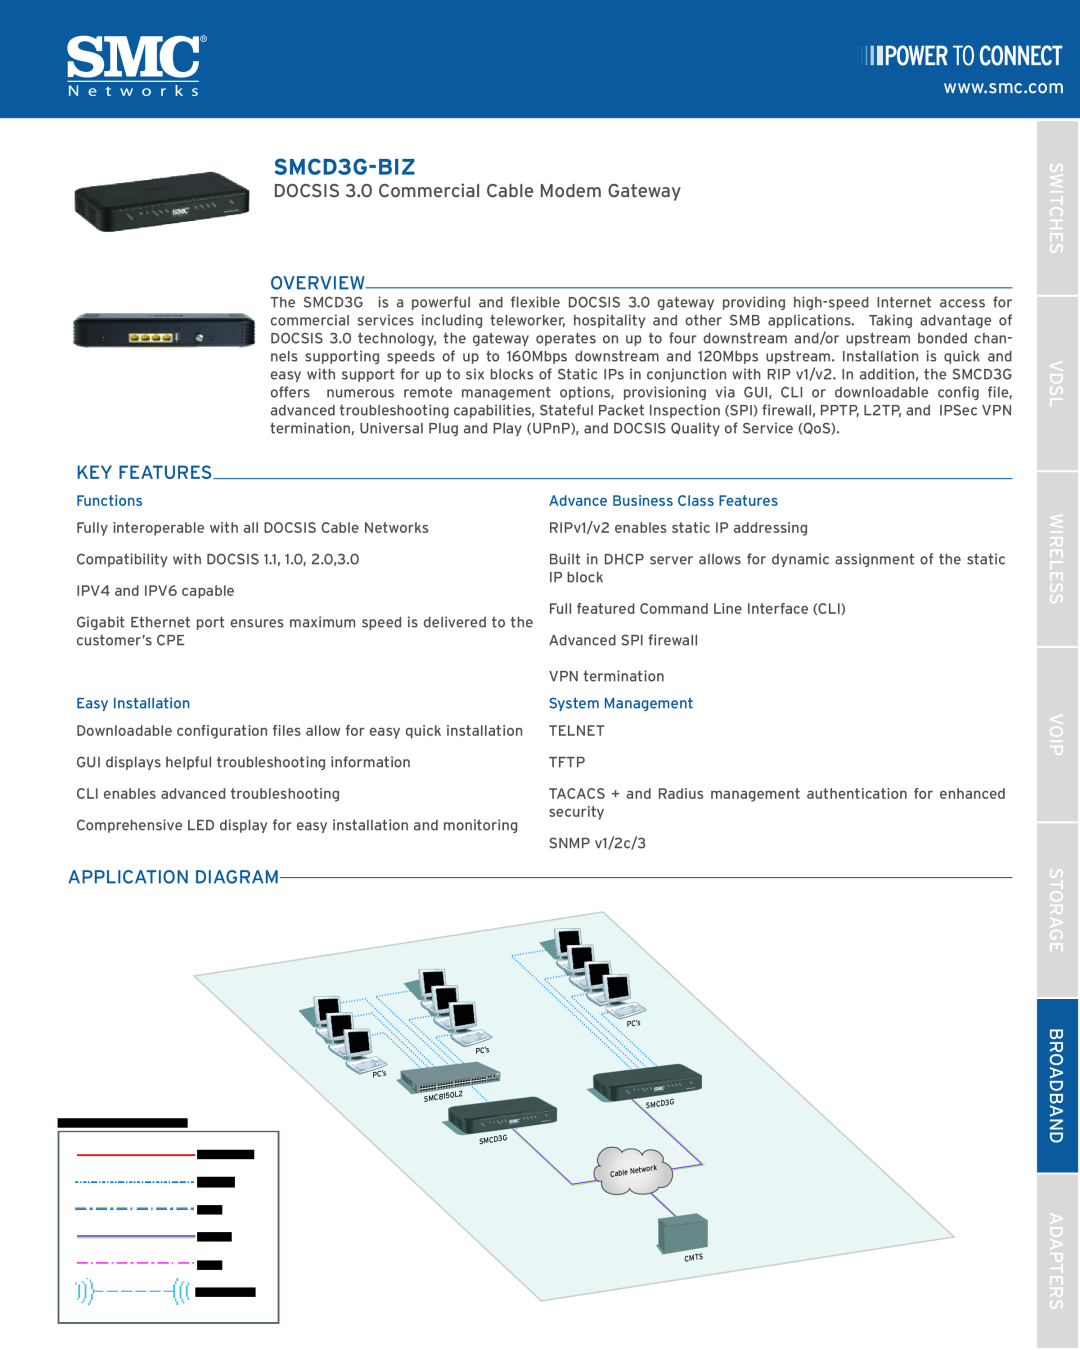 SMC Networks SMCD3G-BIZ manual Overview, Key Features, Switches Vdsl, Wireless Voip, Application Diagram, Functions 